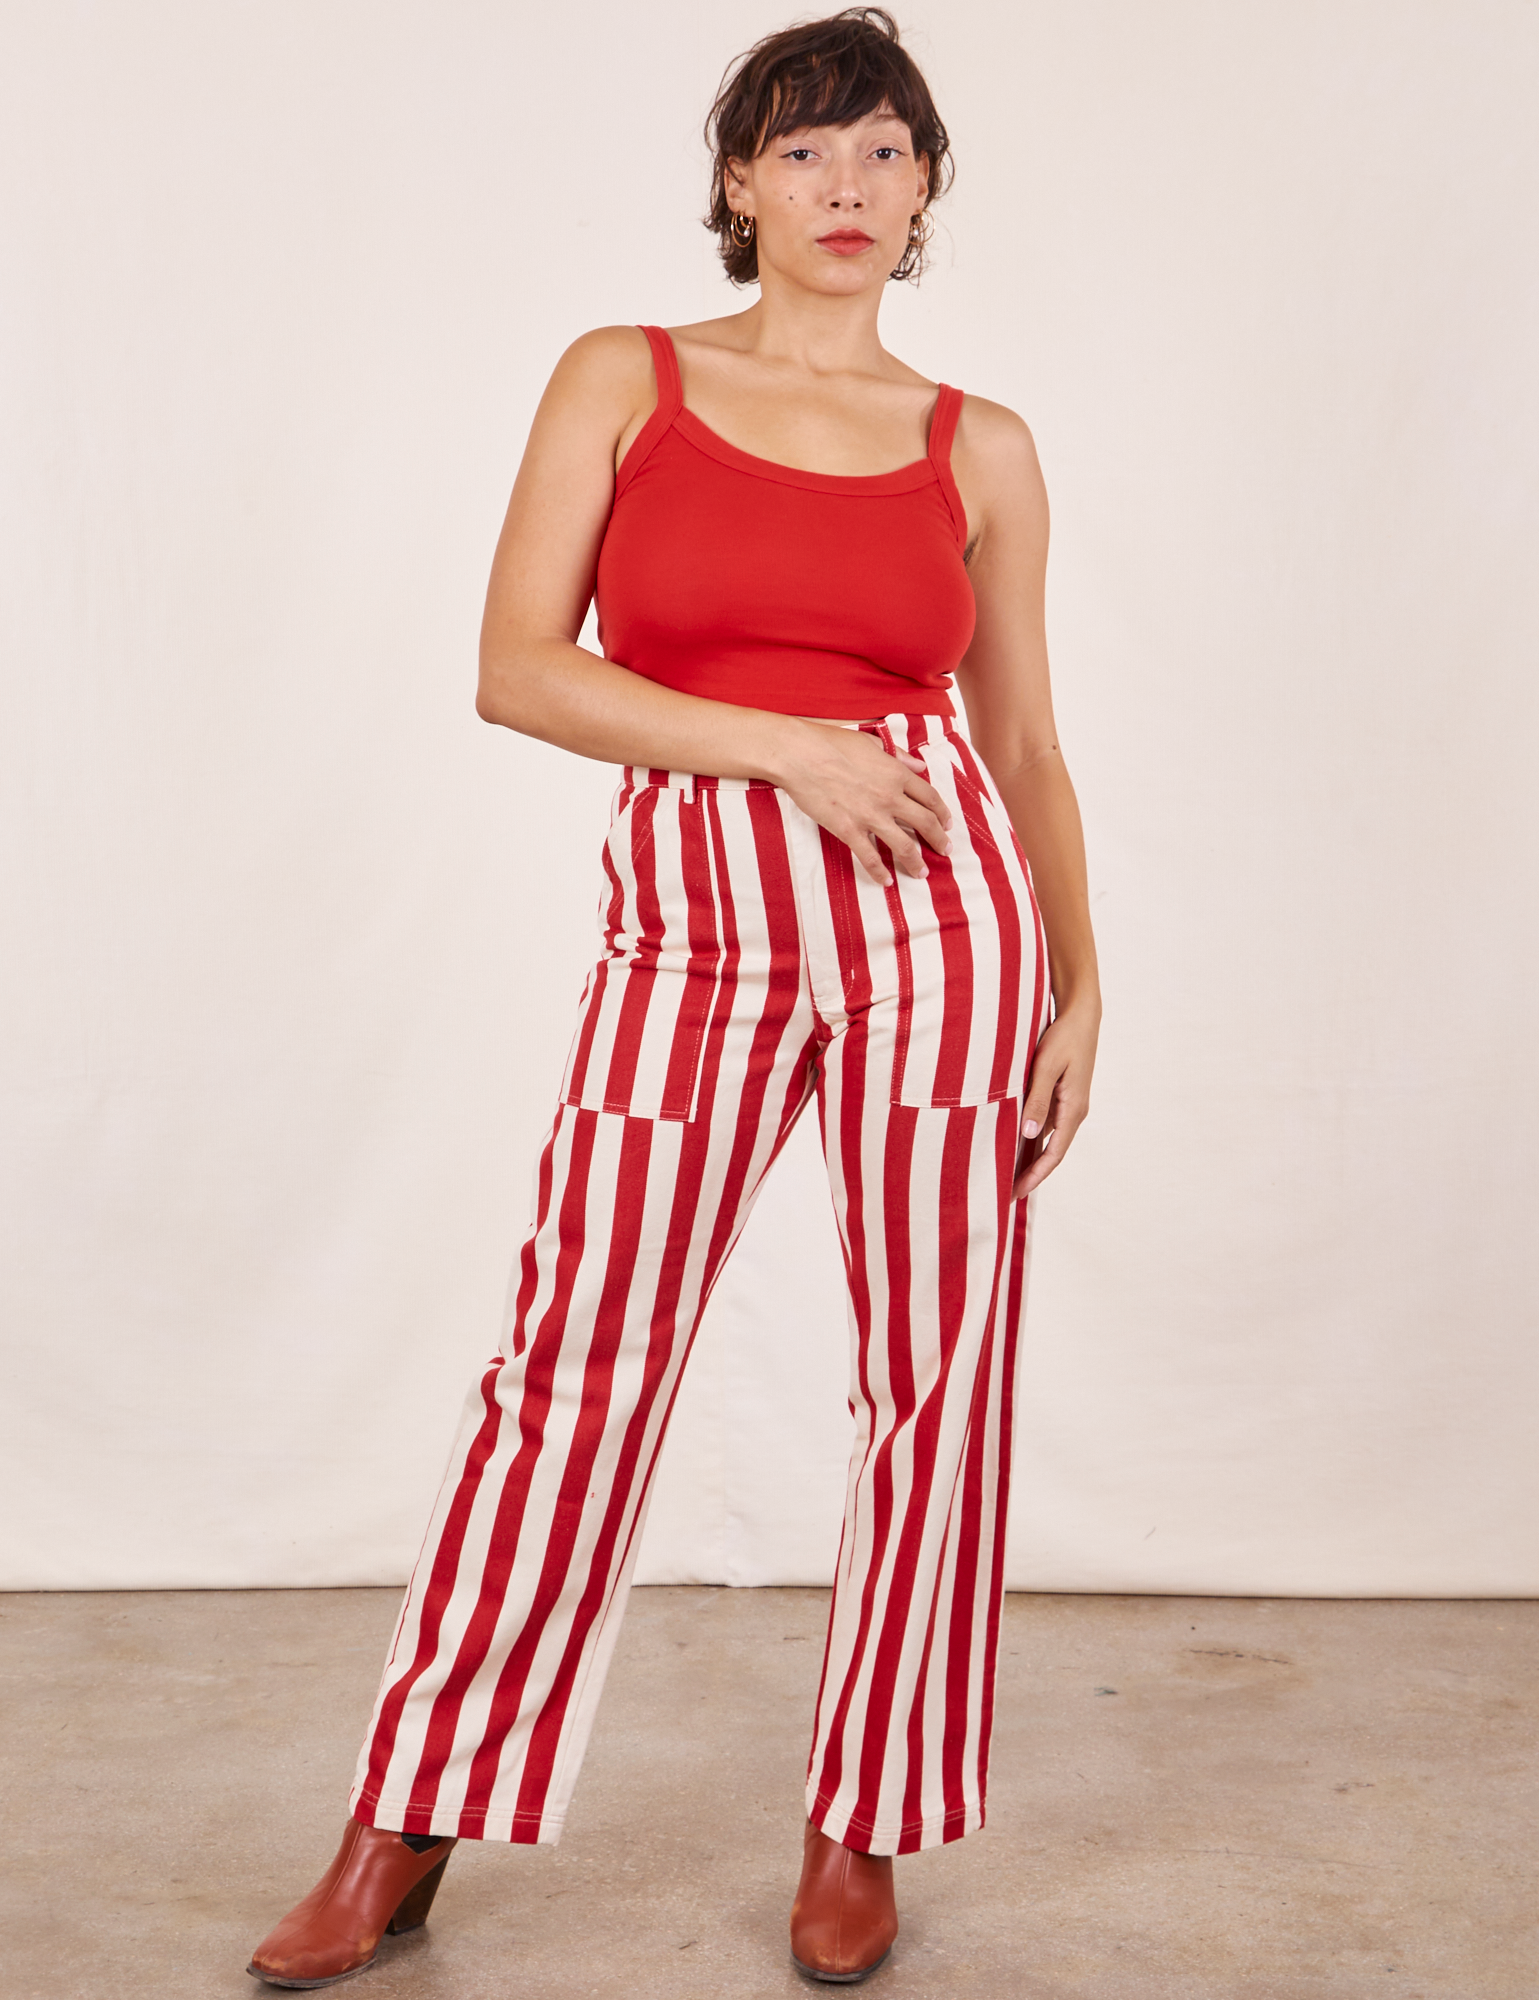 Tiara is 5&#39;4&quot; and wearing S Work Pants in Cherry Stripe paired with mustang red Cropped Cami